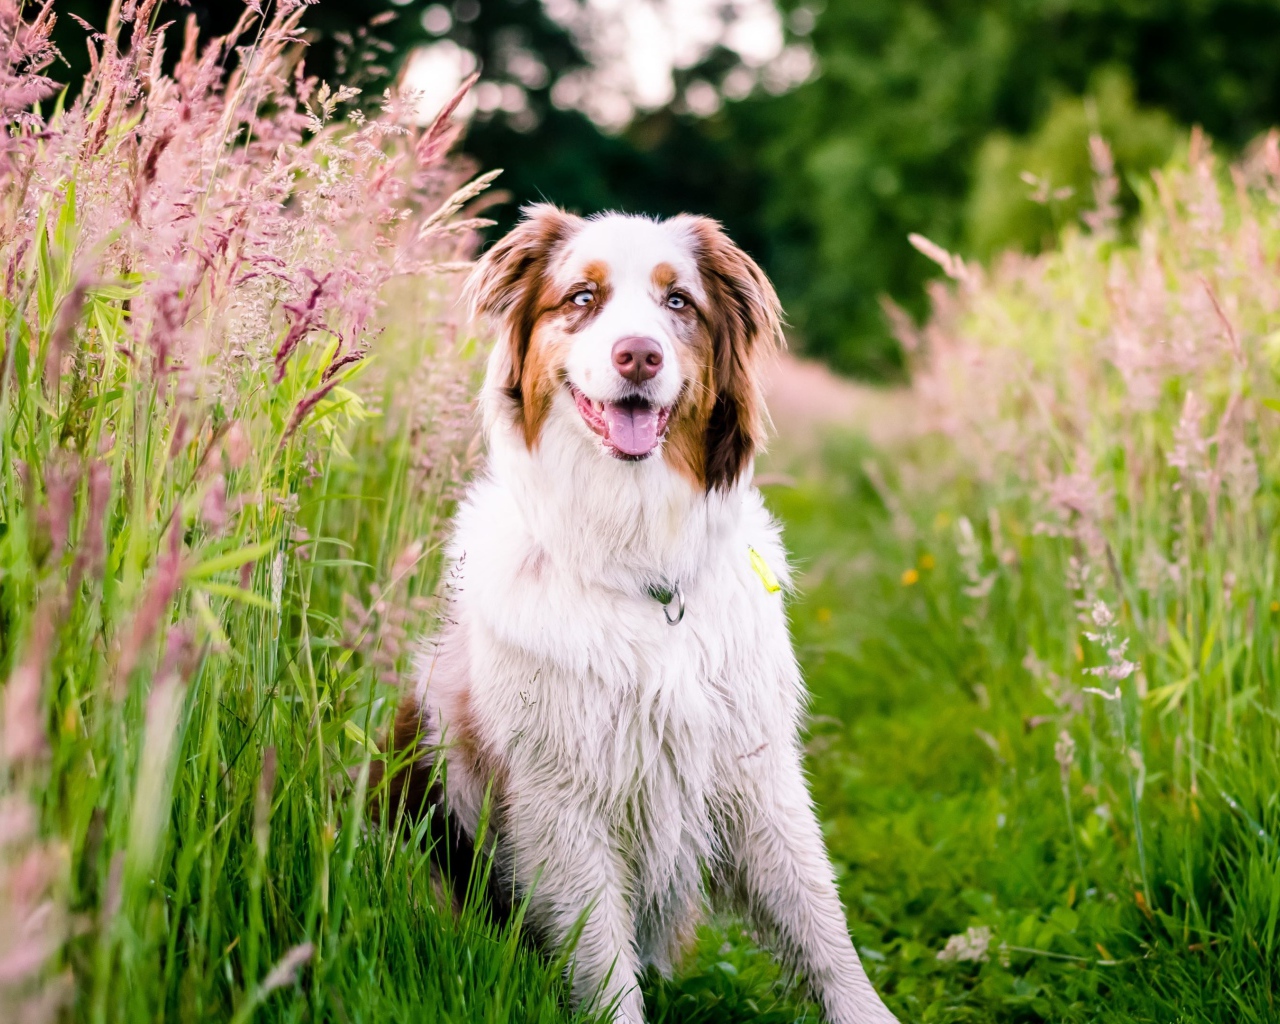 Australian shepherd with tongue hanging out sits in green grass with spikelets